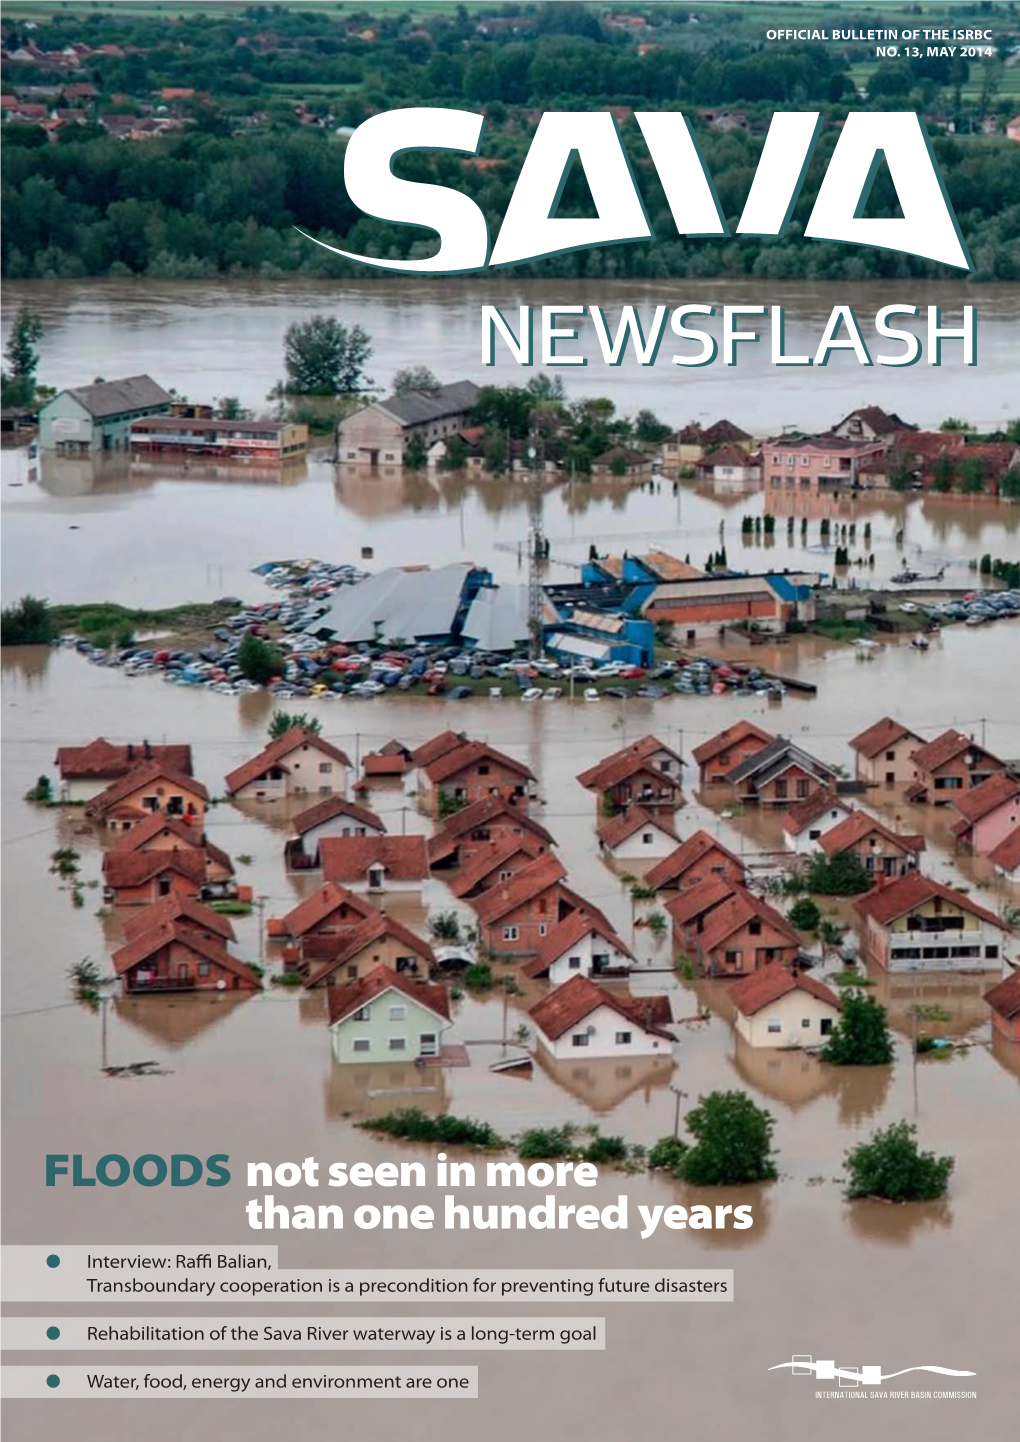 FLOODS Not Seen in More Than One Hundred Years ● Interview: Raffi Balian, Transboundary Cooperation Is a Precondition for Preventing Future Disasters